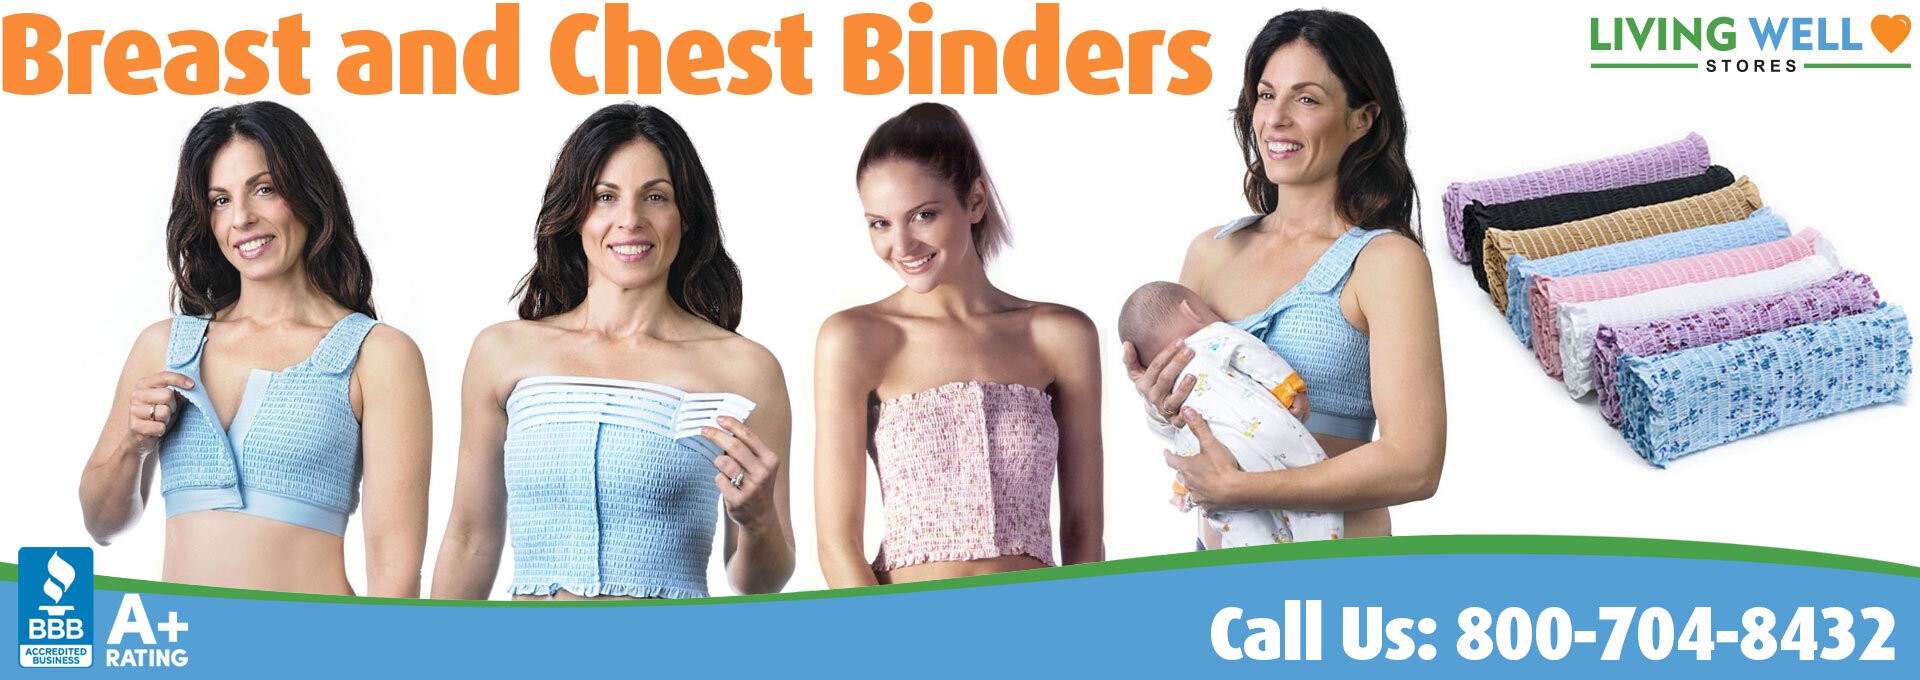 Living Well Stores: Shop Breast and Chest Binders